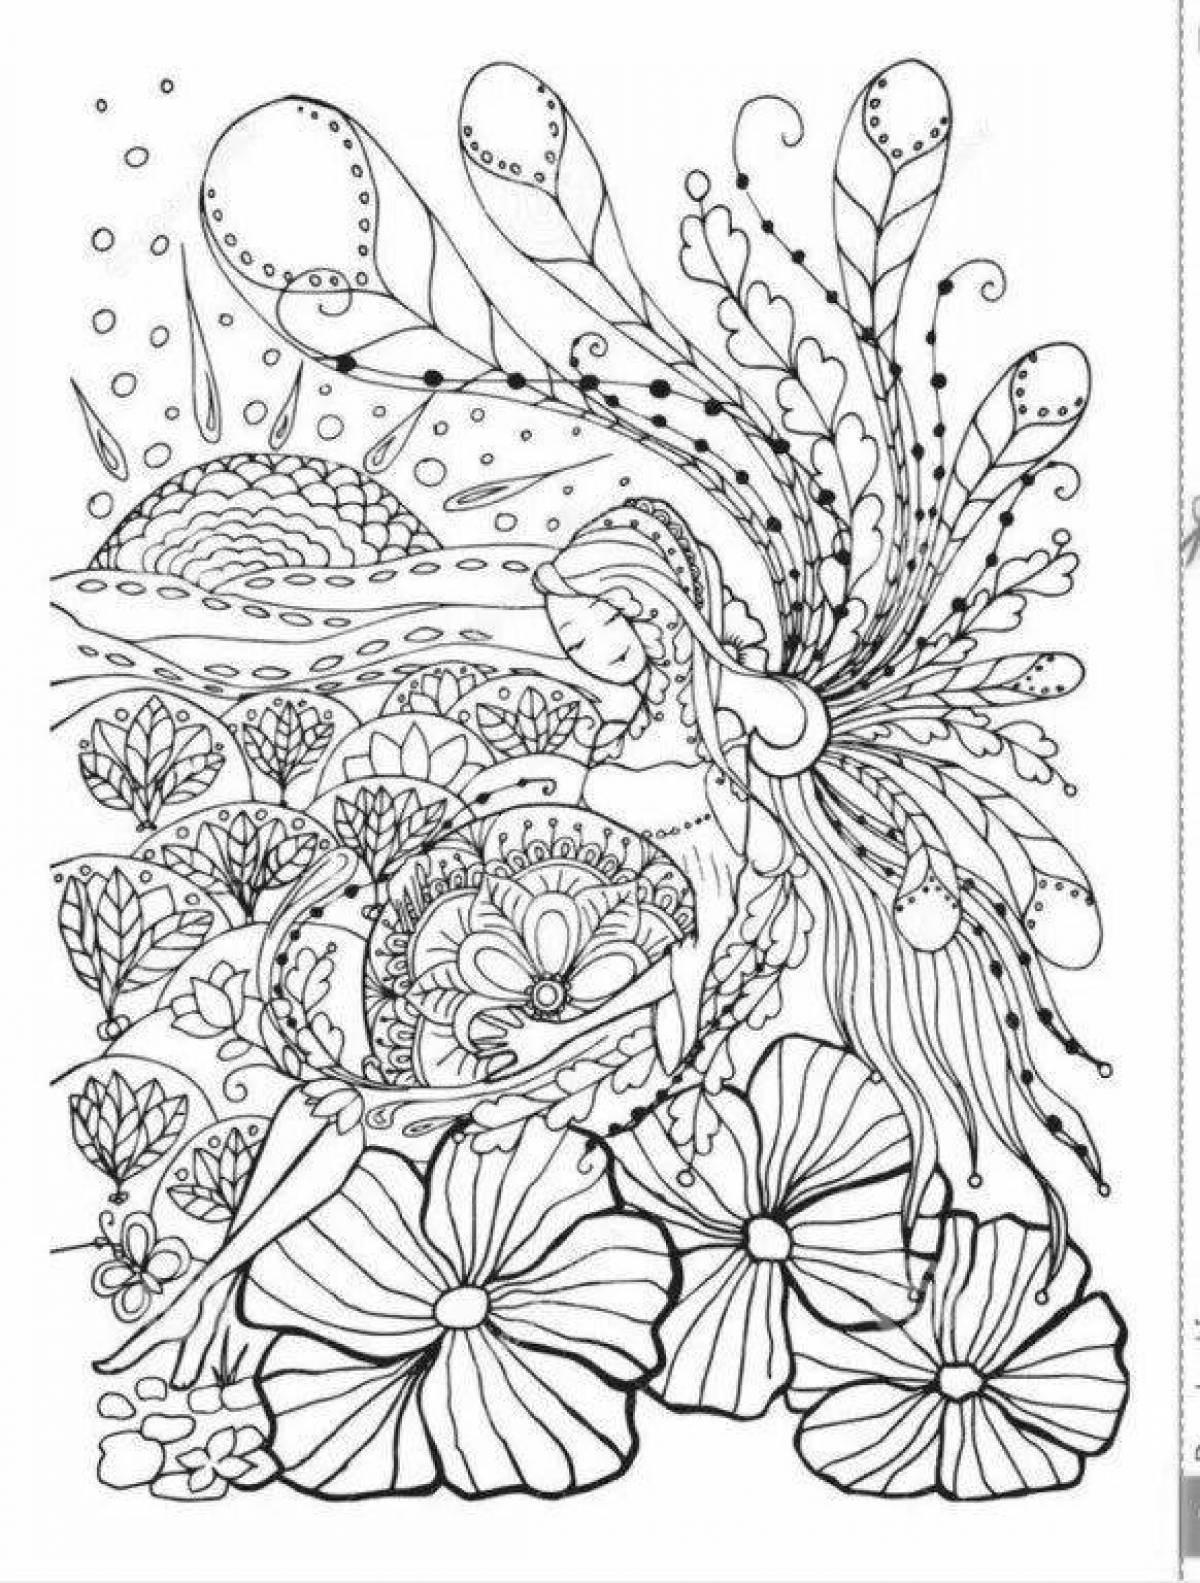 Stimulating coloring for pregnant women antistress